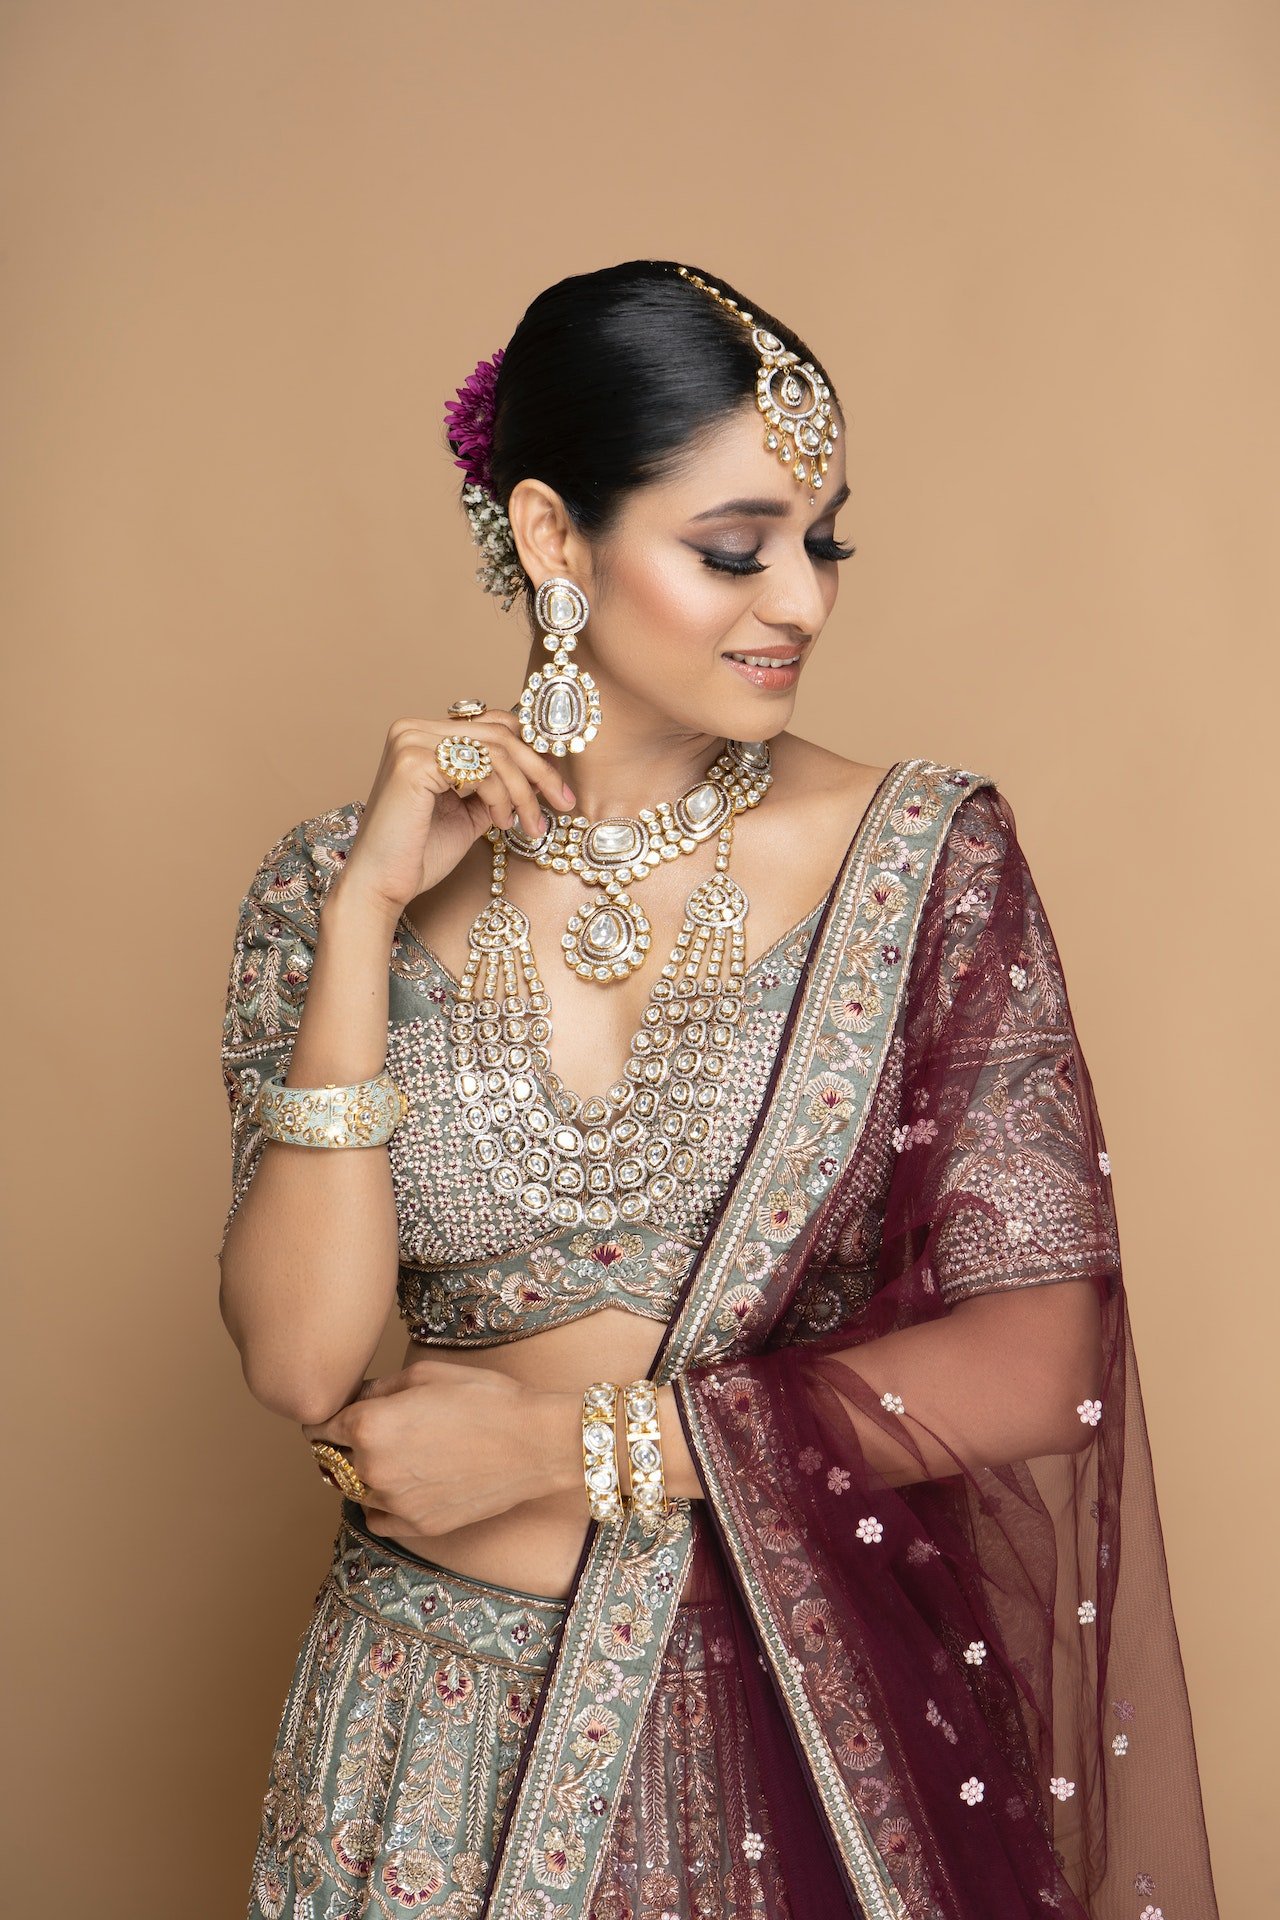 what-is-kundan-and-polki-jewelry-bride-traditional-indian-jewellery-bridal.jpg